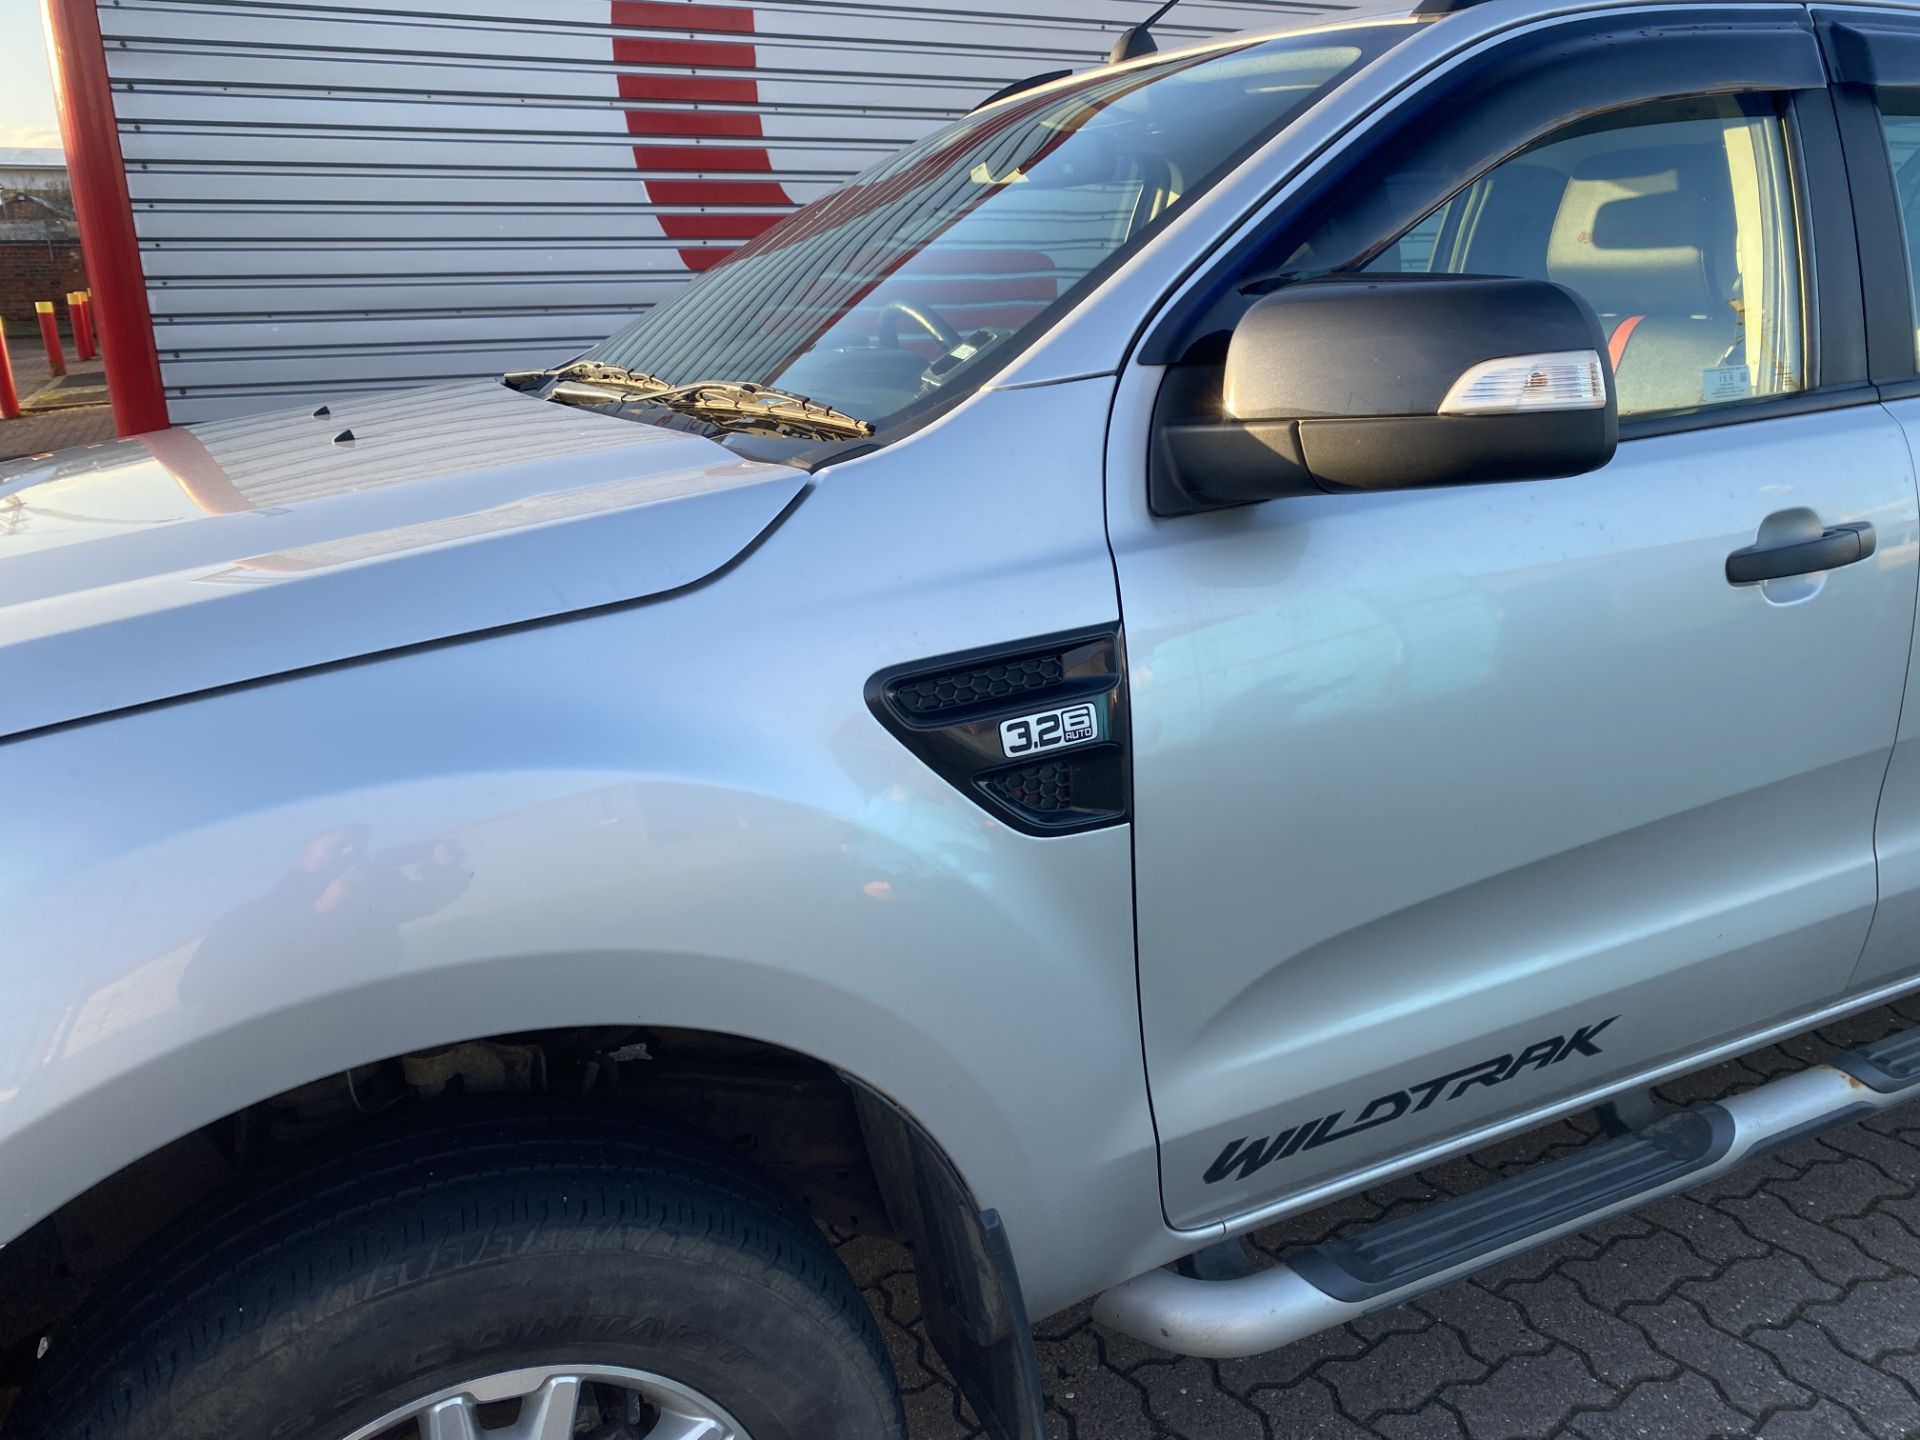 Ford Ranger Wildtrak 4 x 4 3.2 TDCI 6 Speed Automatic Double Cab Pick Up Truck, Silver - Image 5 of 30